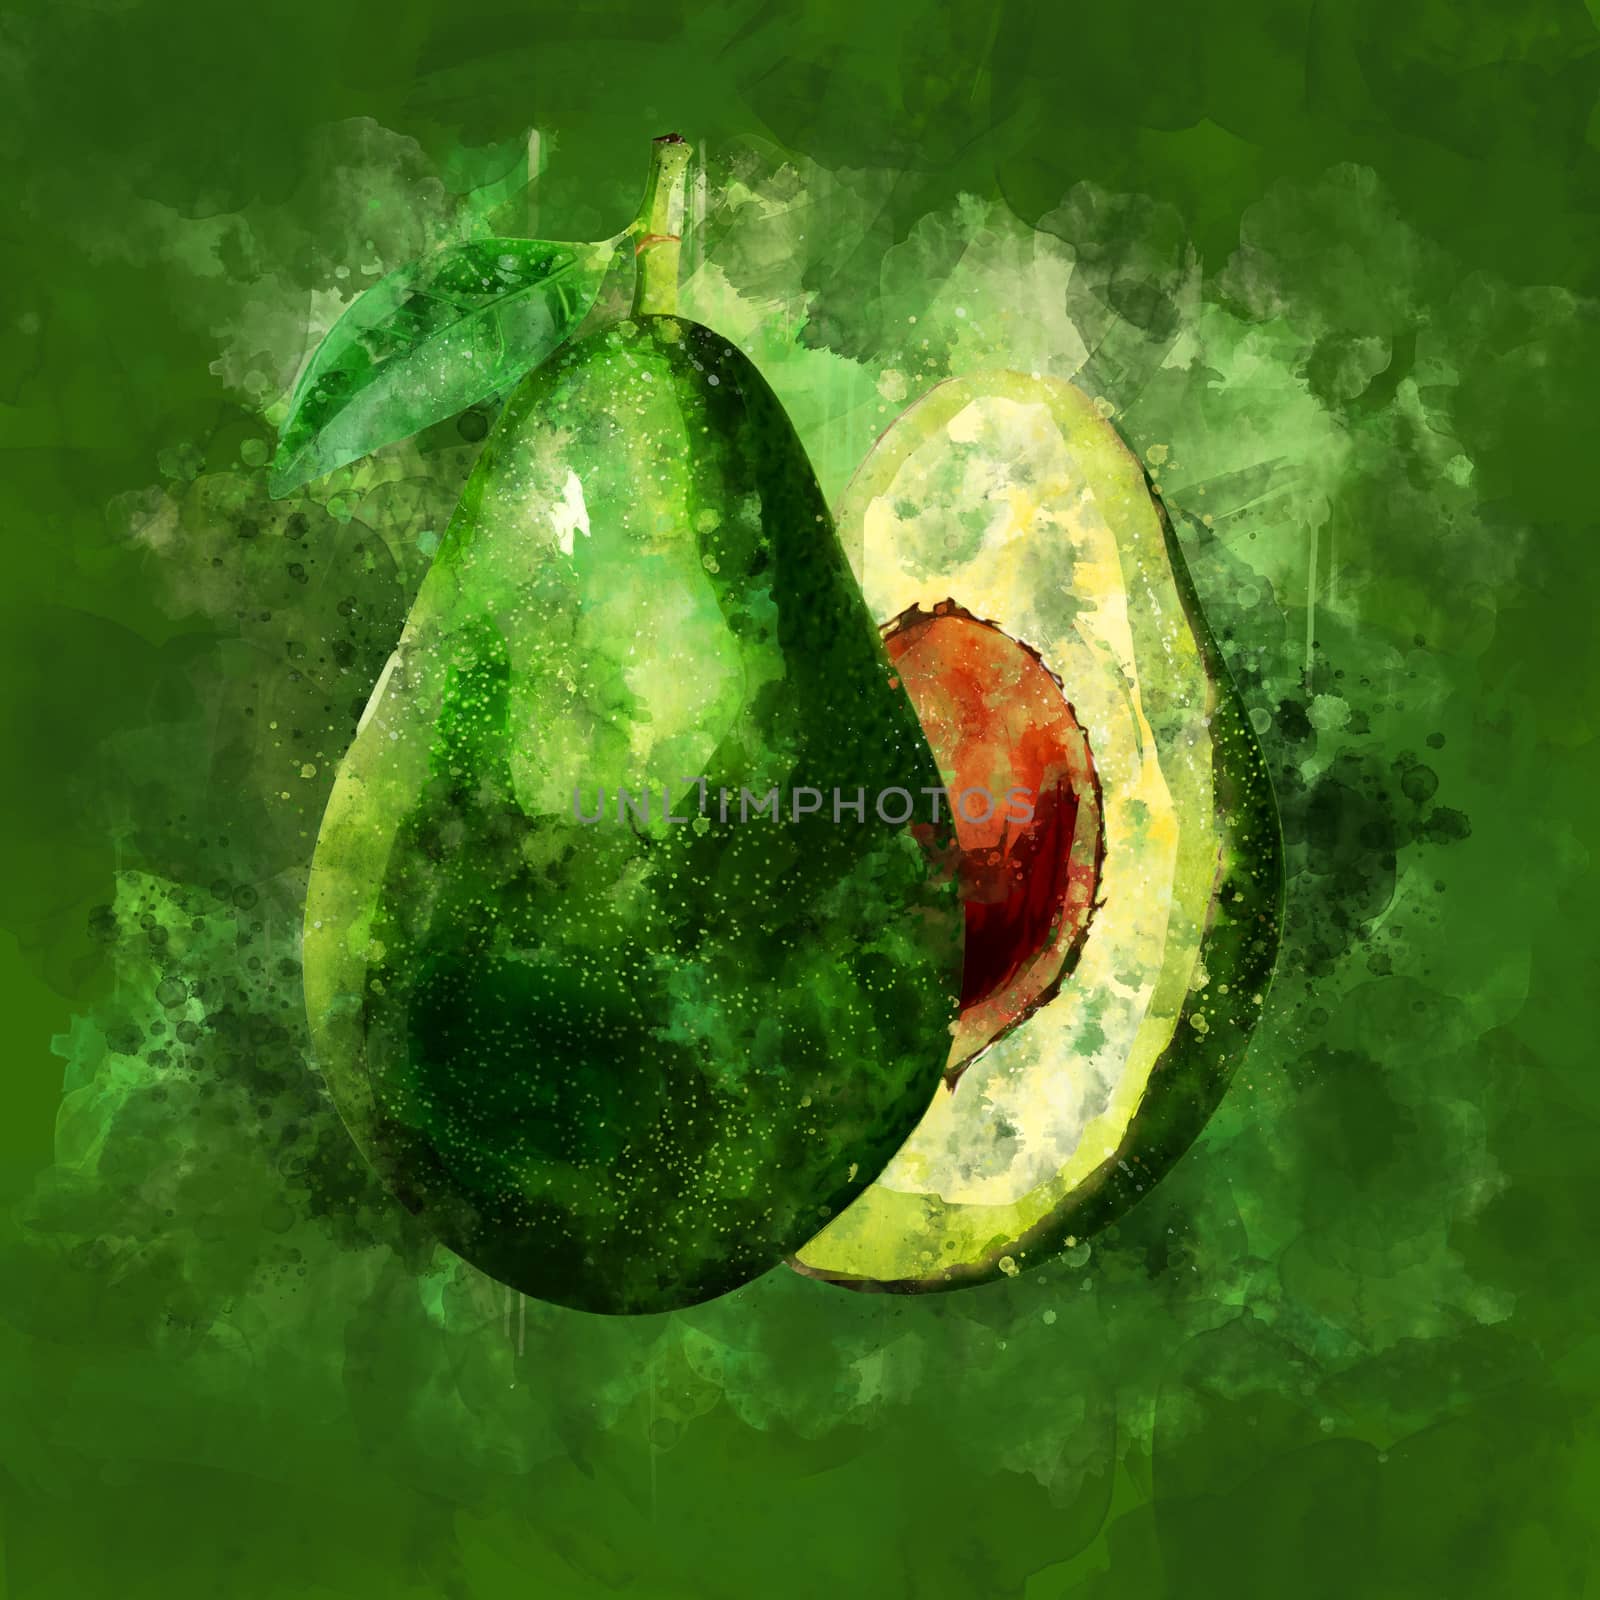 Avocado, hand-painted illustration on a green background